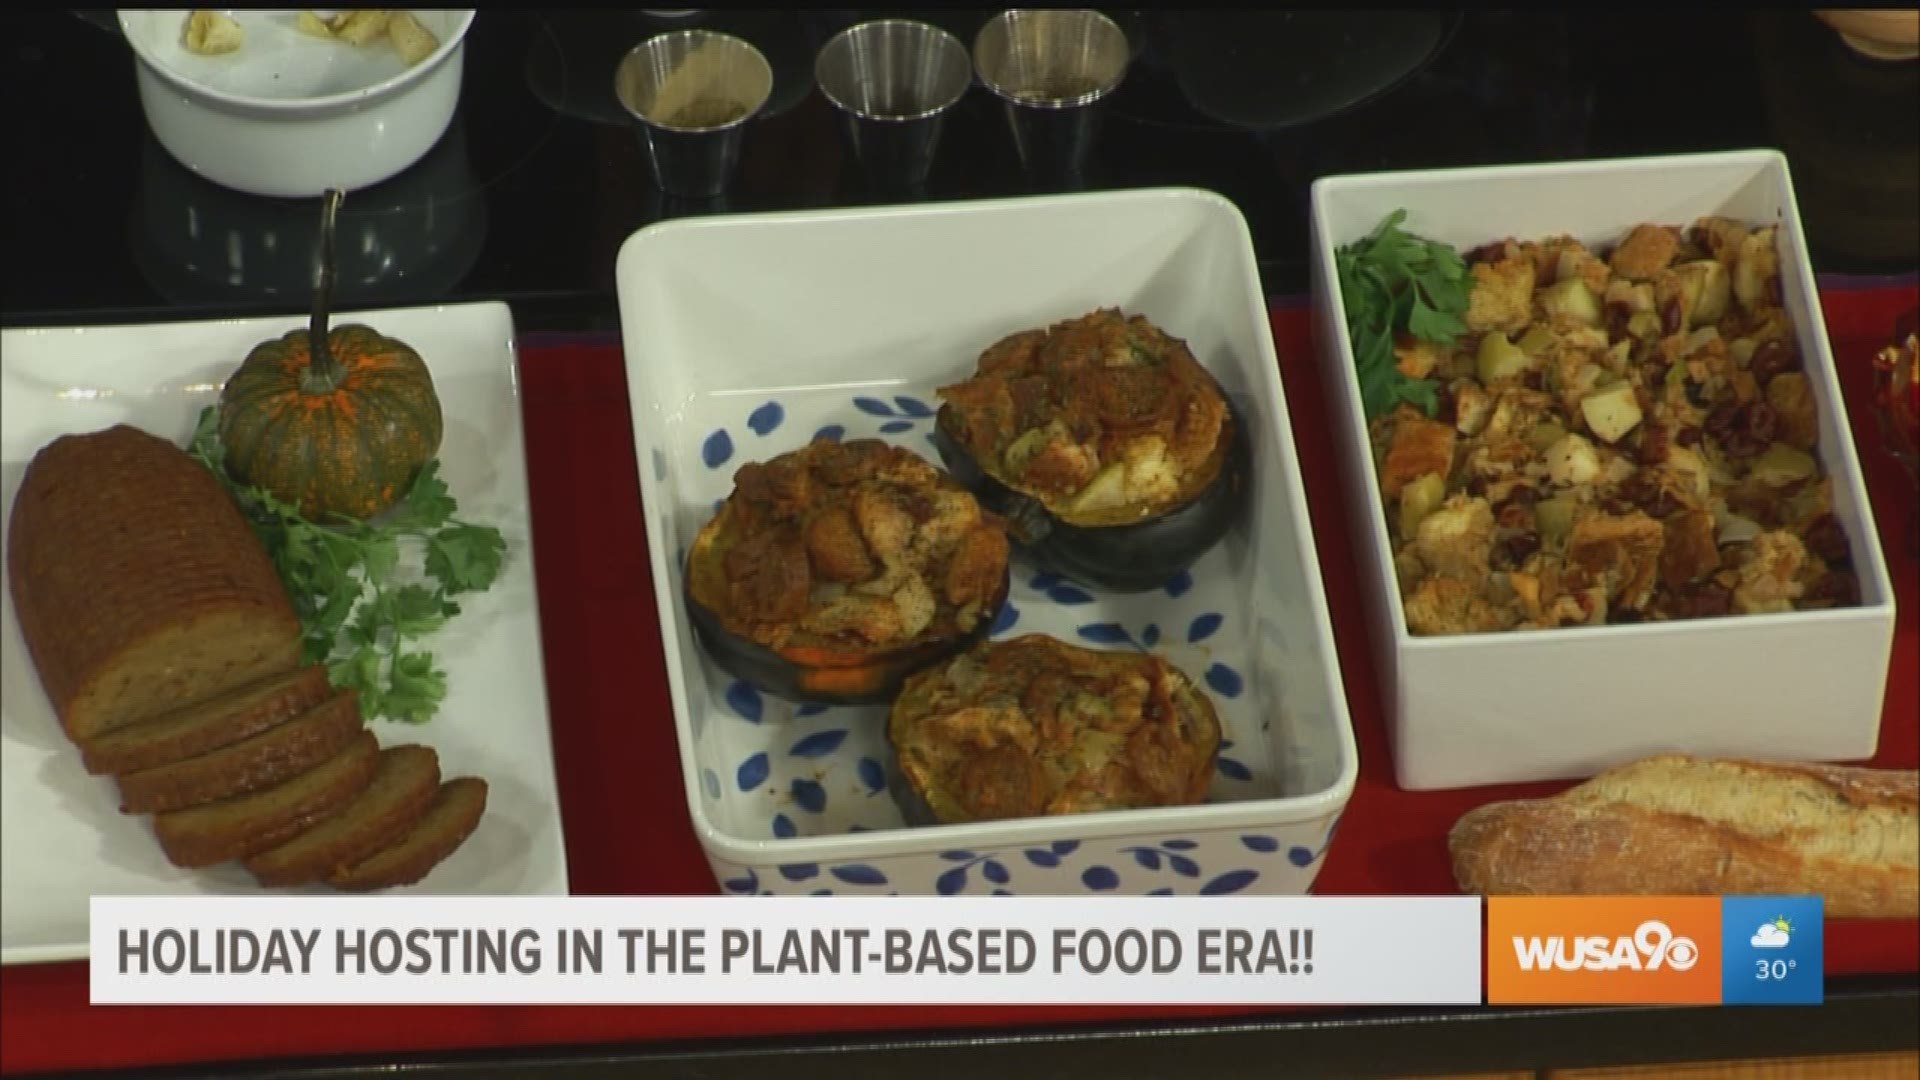 Dawson’s Market owner Bart Yablonsky shows us how to make a vegan apple sausage and sage stuffing dish that tastes like the real deal!